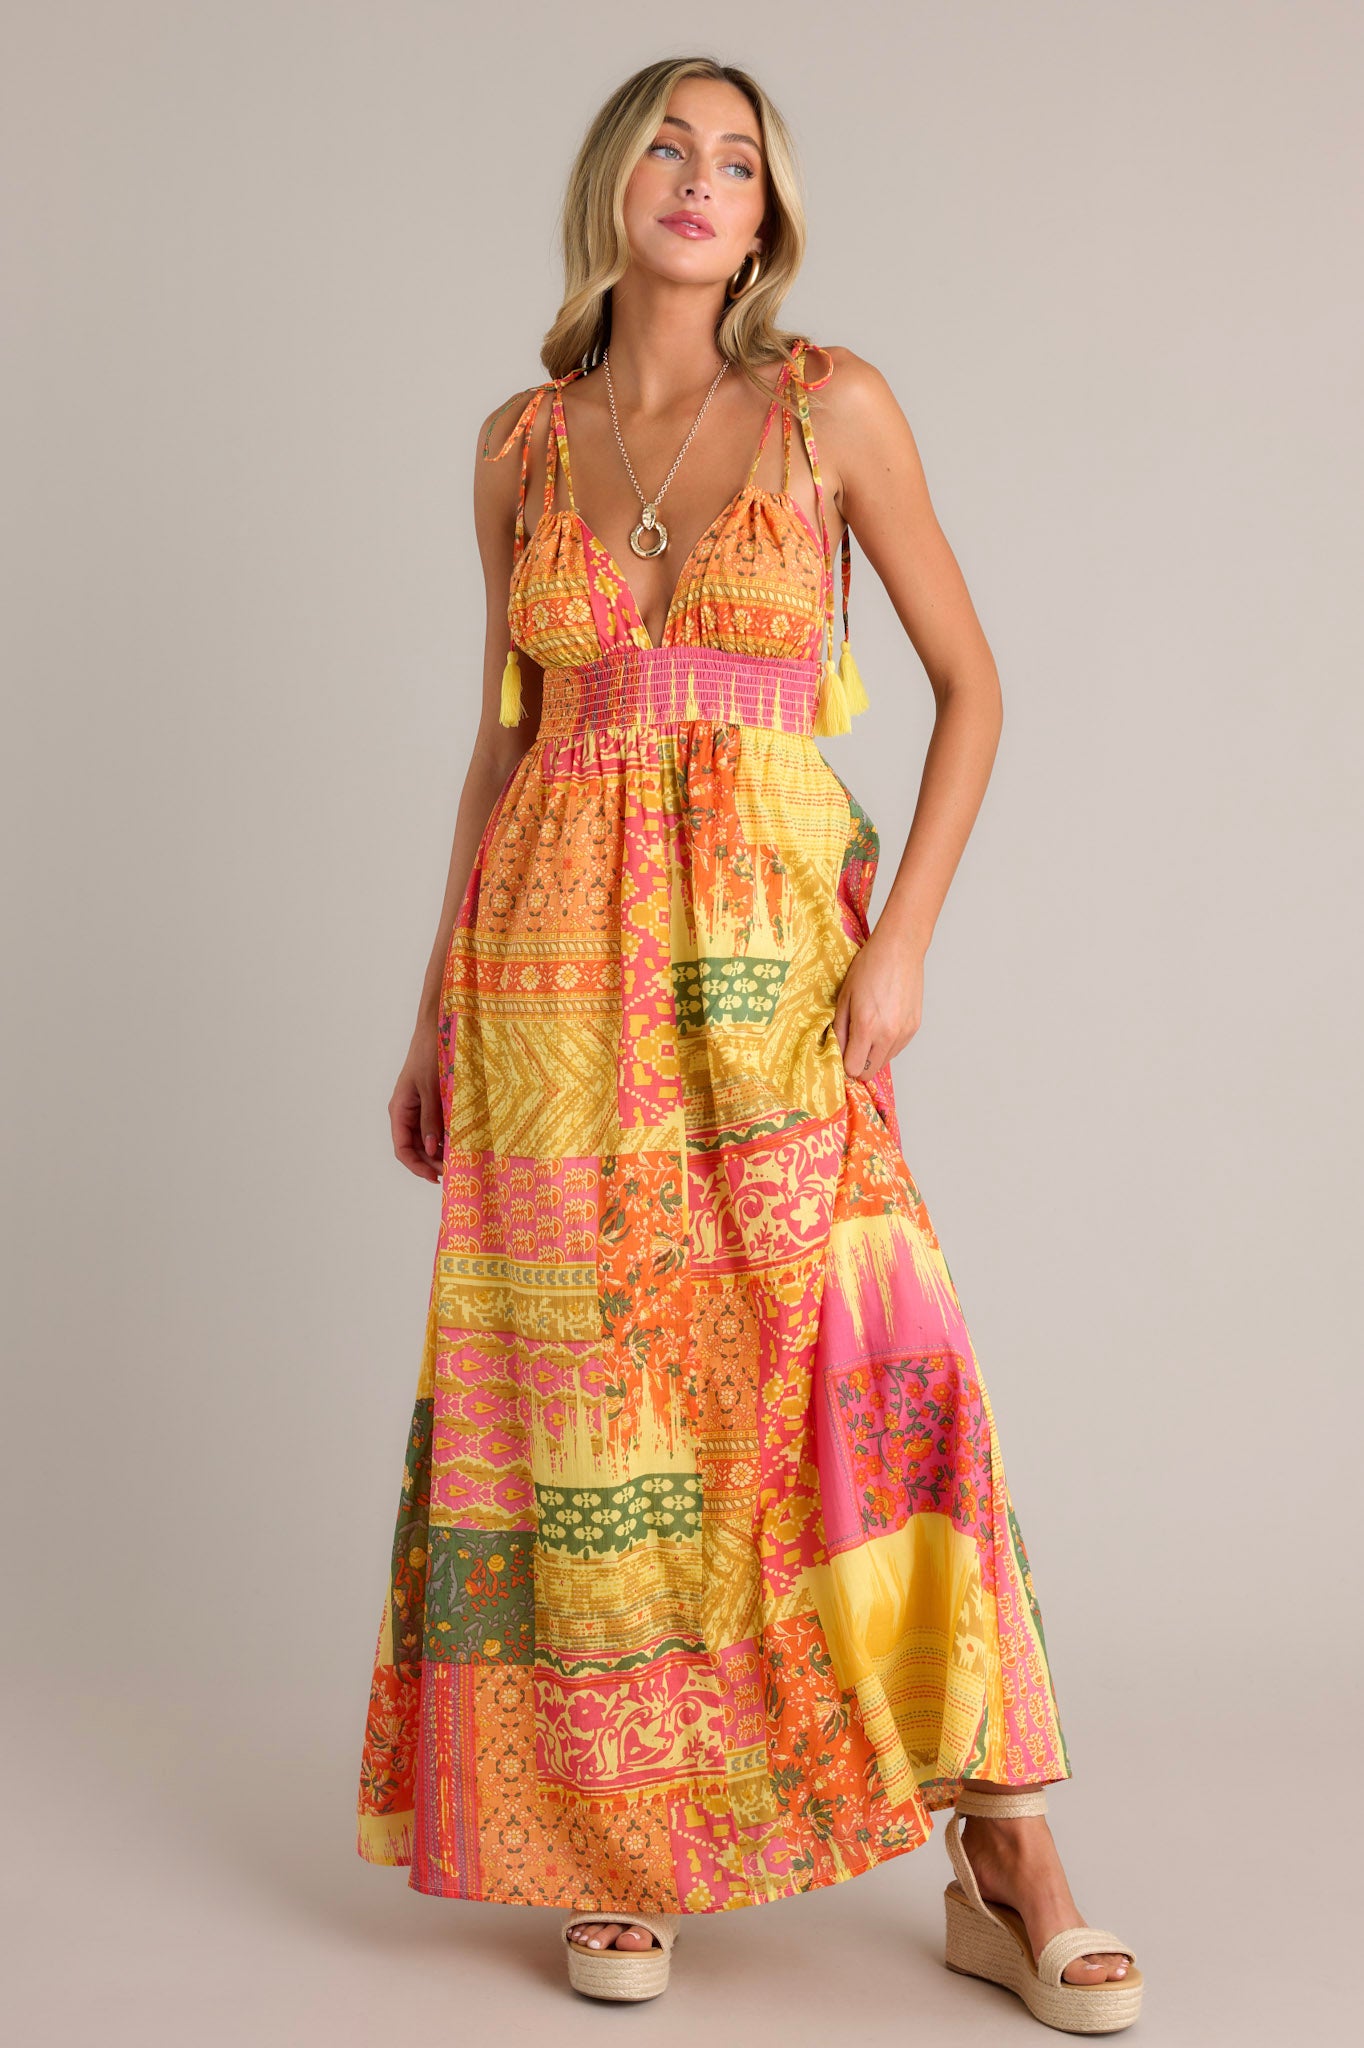 Front angled view of an orange maxi dress featuring a v-neckline, adjustable self-tie straps, a low back, a fully smocked waistband, a unique patchwork design, and a flowing silhouette